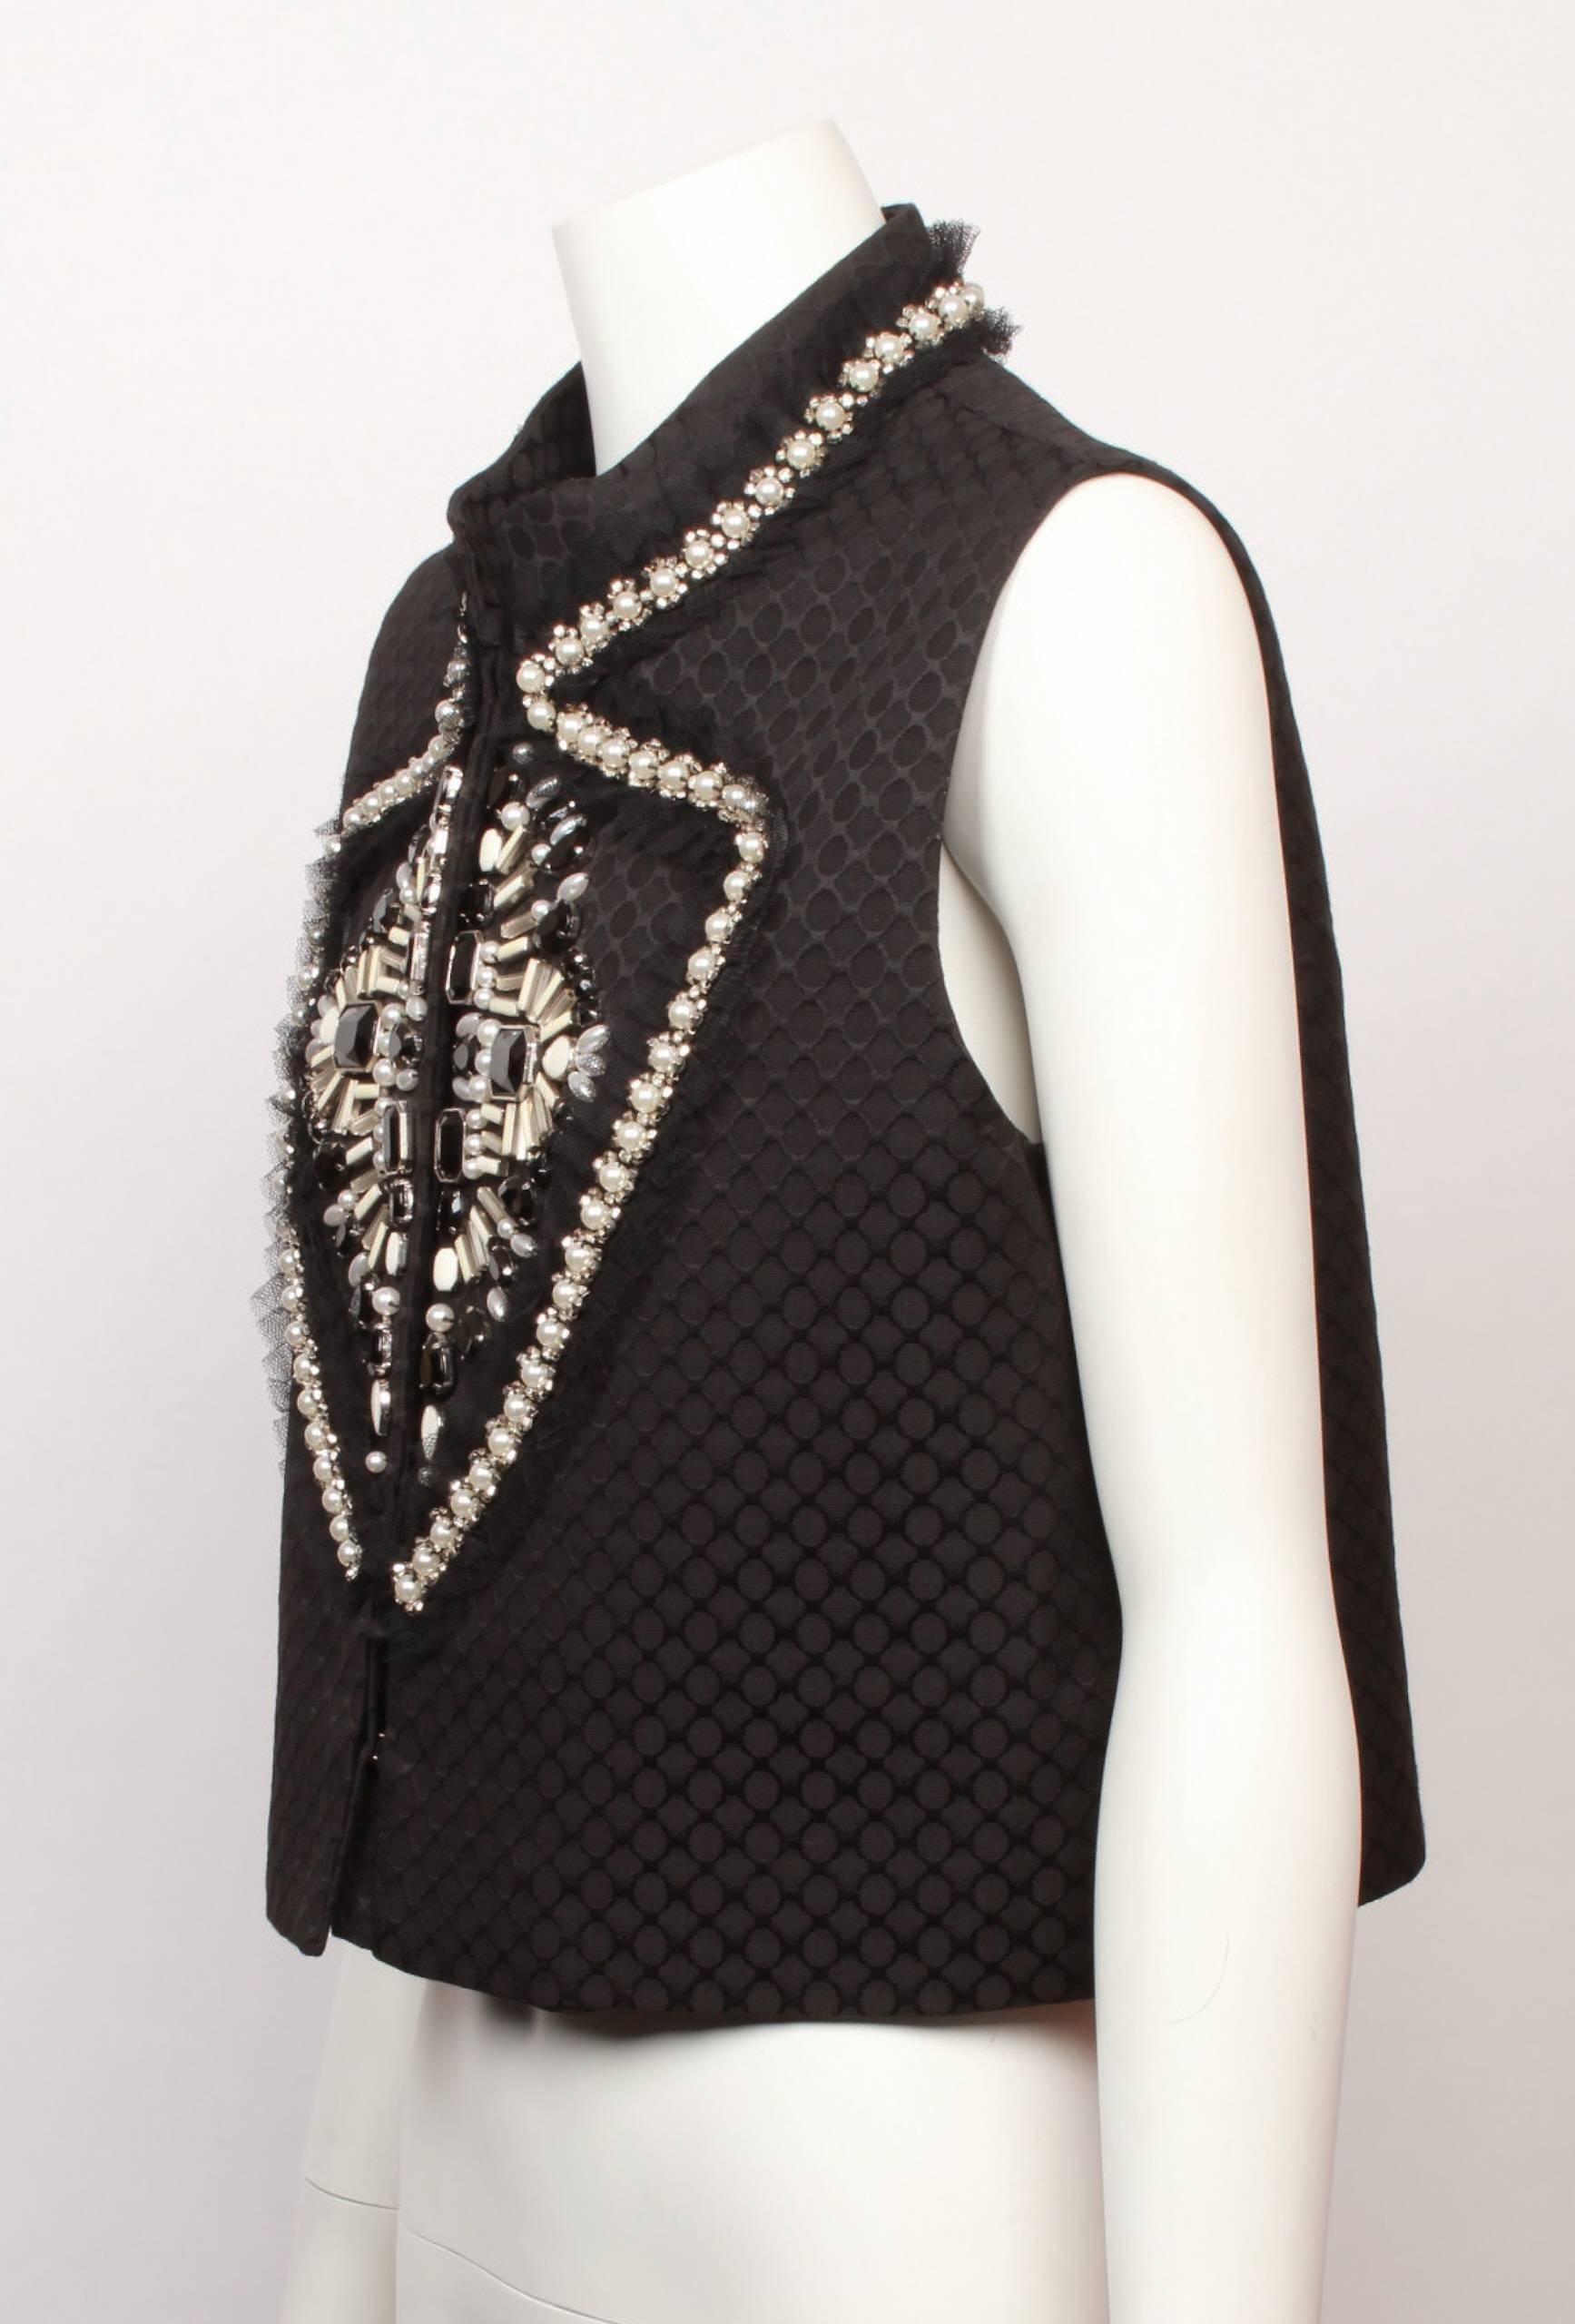 Givenchy  black cropped vest with jewelled front embellishment. 
Jewels are in tones of black, white, silver and pearl and continue across the back neckline .
Base fabric is black textured faille. 
Fully lined with hook and eye front closure. 